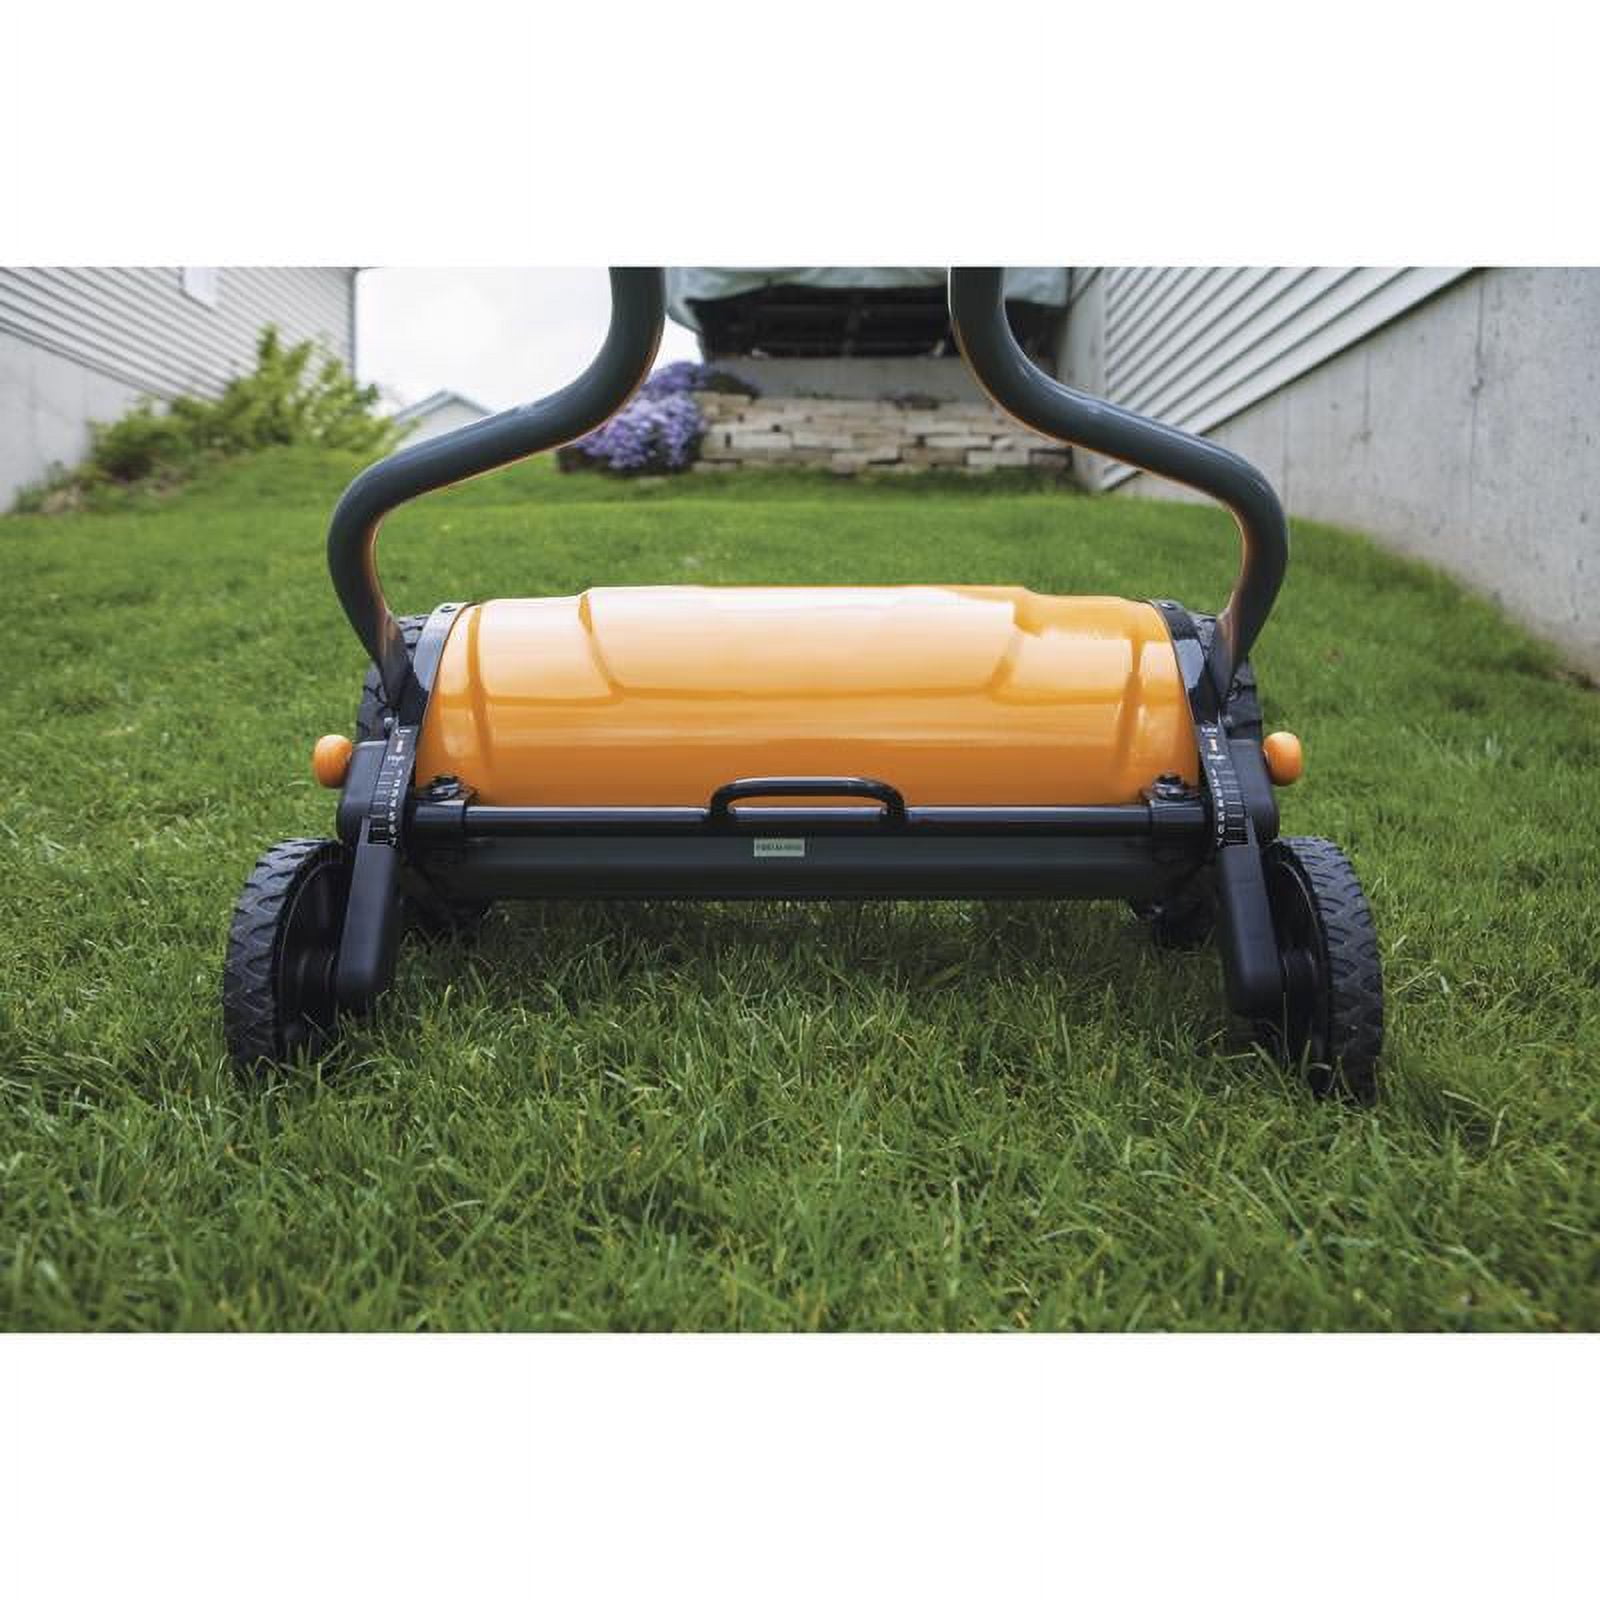 Fiskars StaySharp Max found for free. Sufficient for mowing a 0.37 acre  yard of soft grass? : r/lawncare